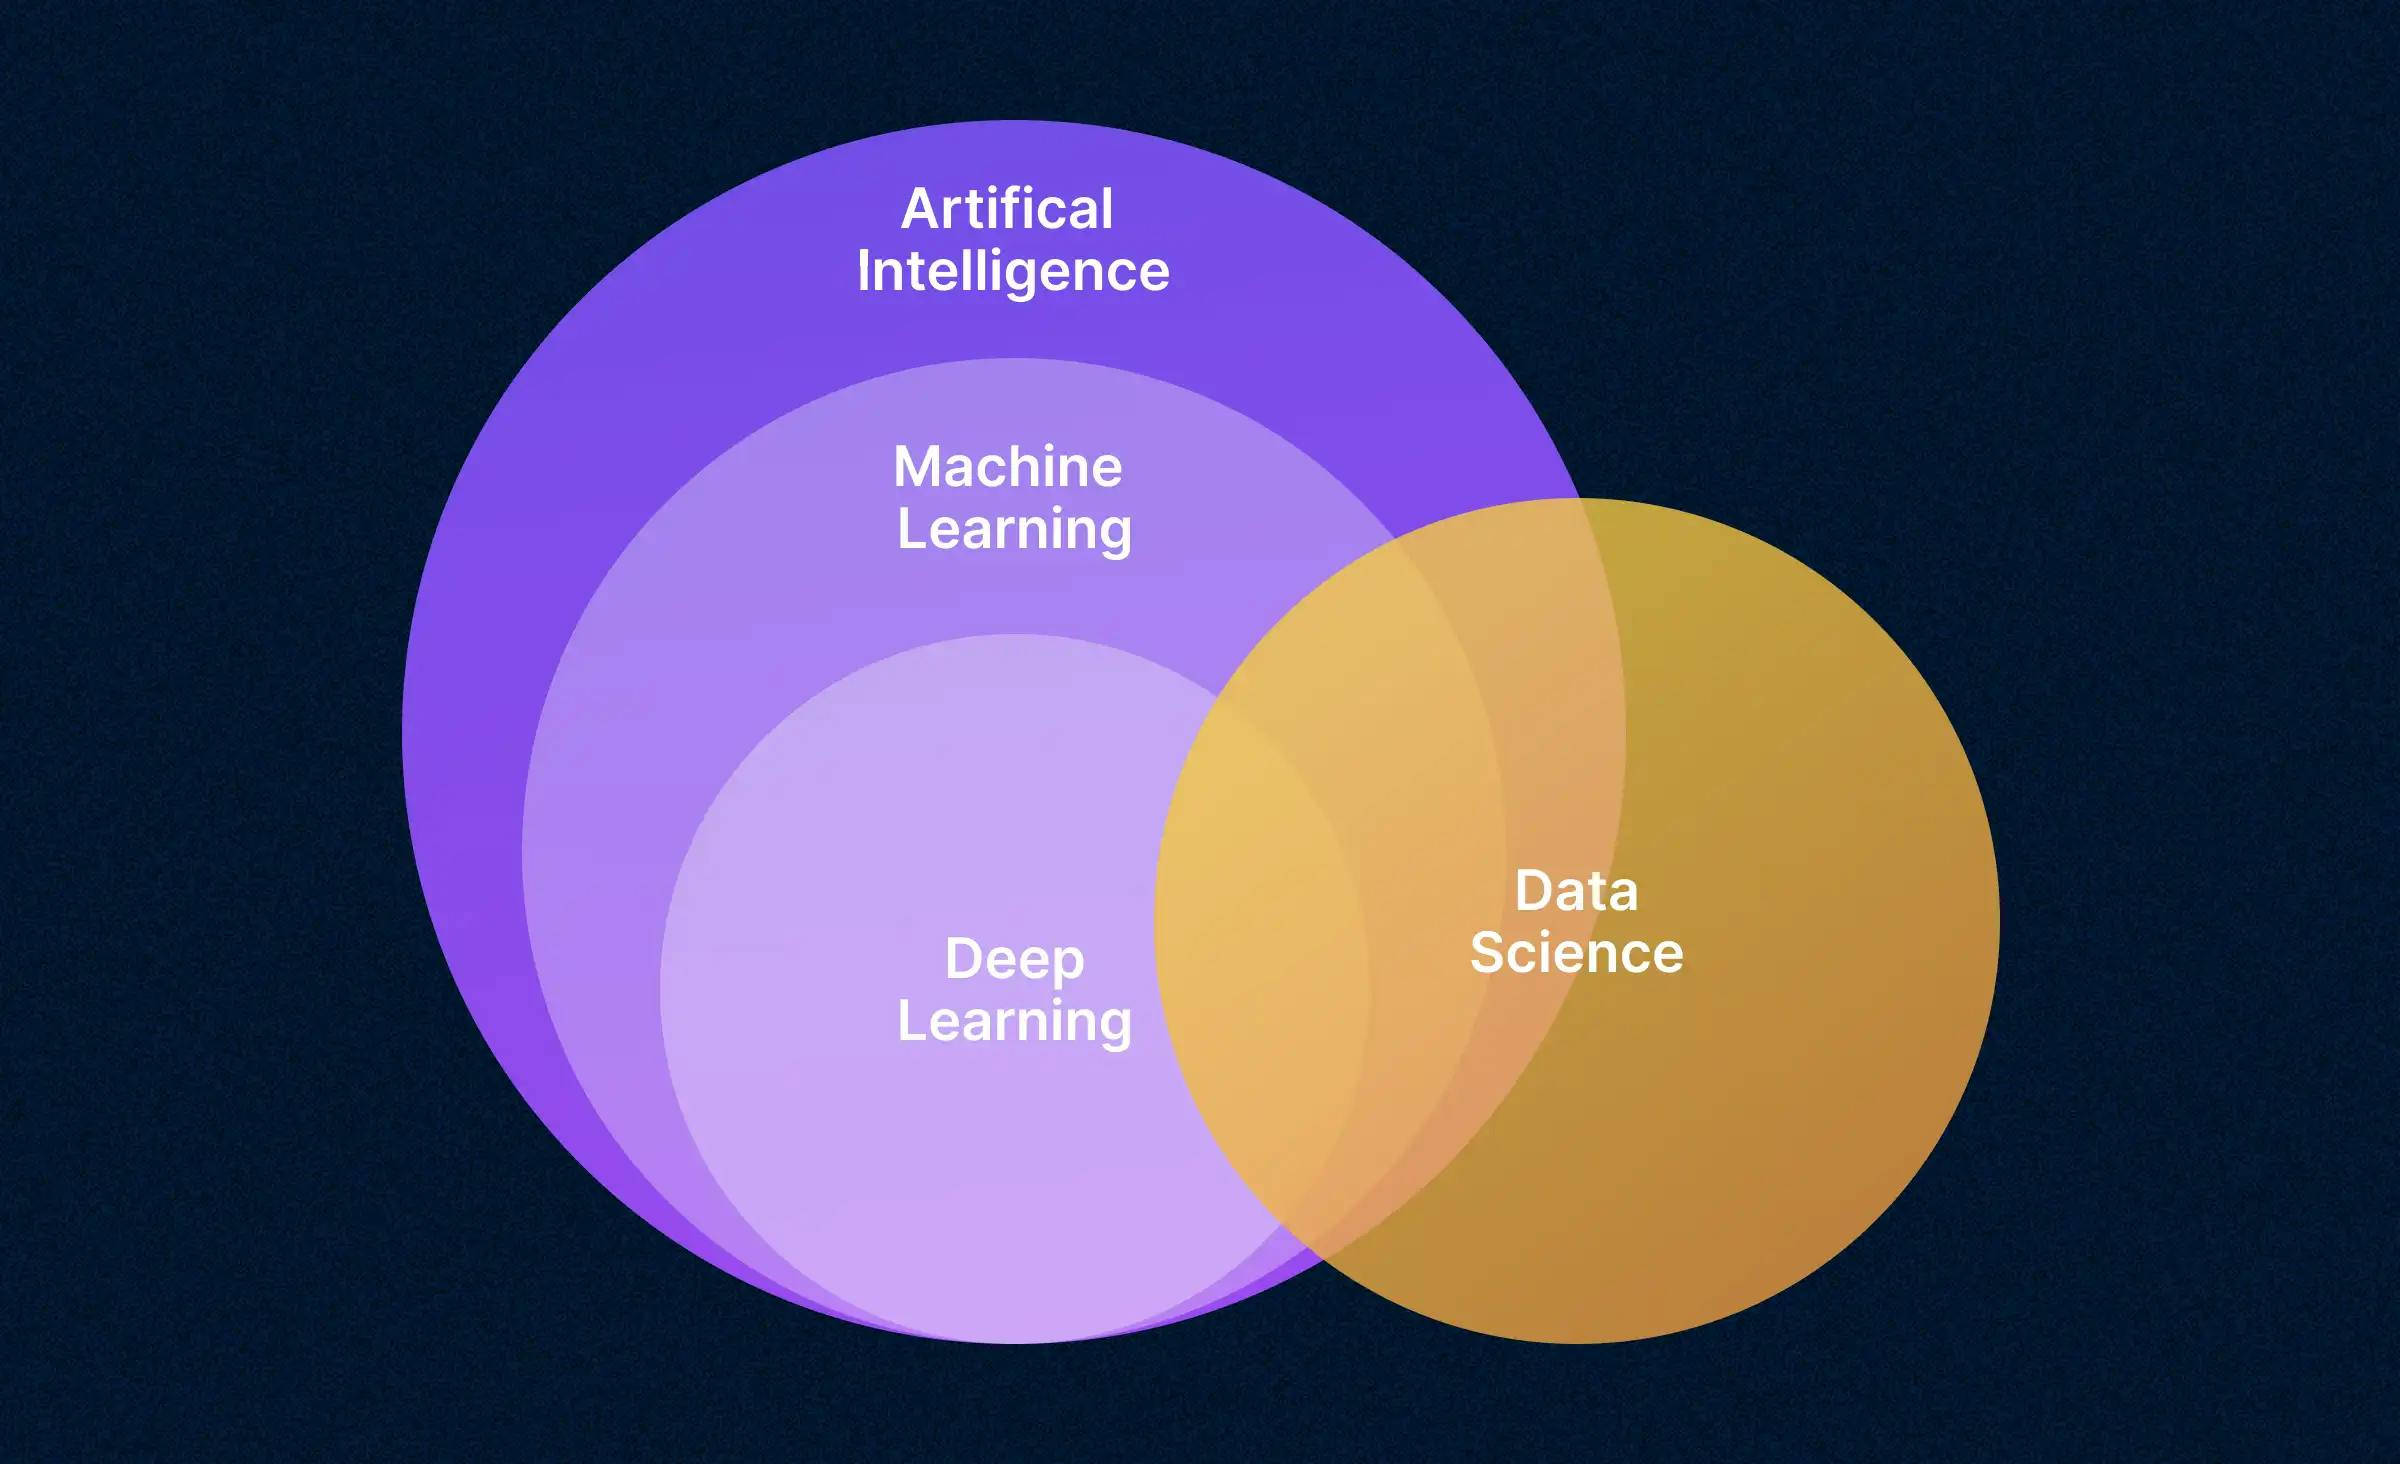 The image depicts four circles representing the relationship within the AI sphere: deep learning is a part of machine learning, while machine learning is a part of artificial intelligence, and data science encompasses them all.